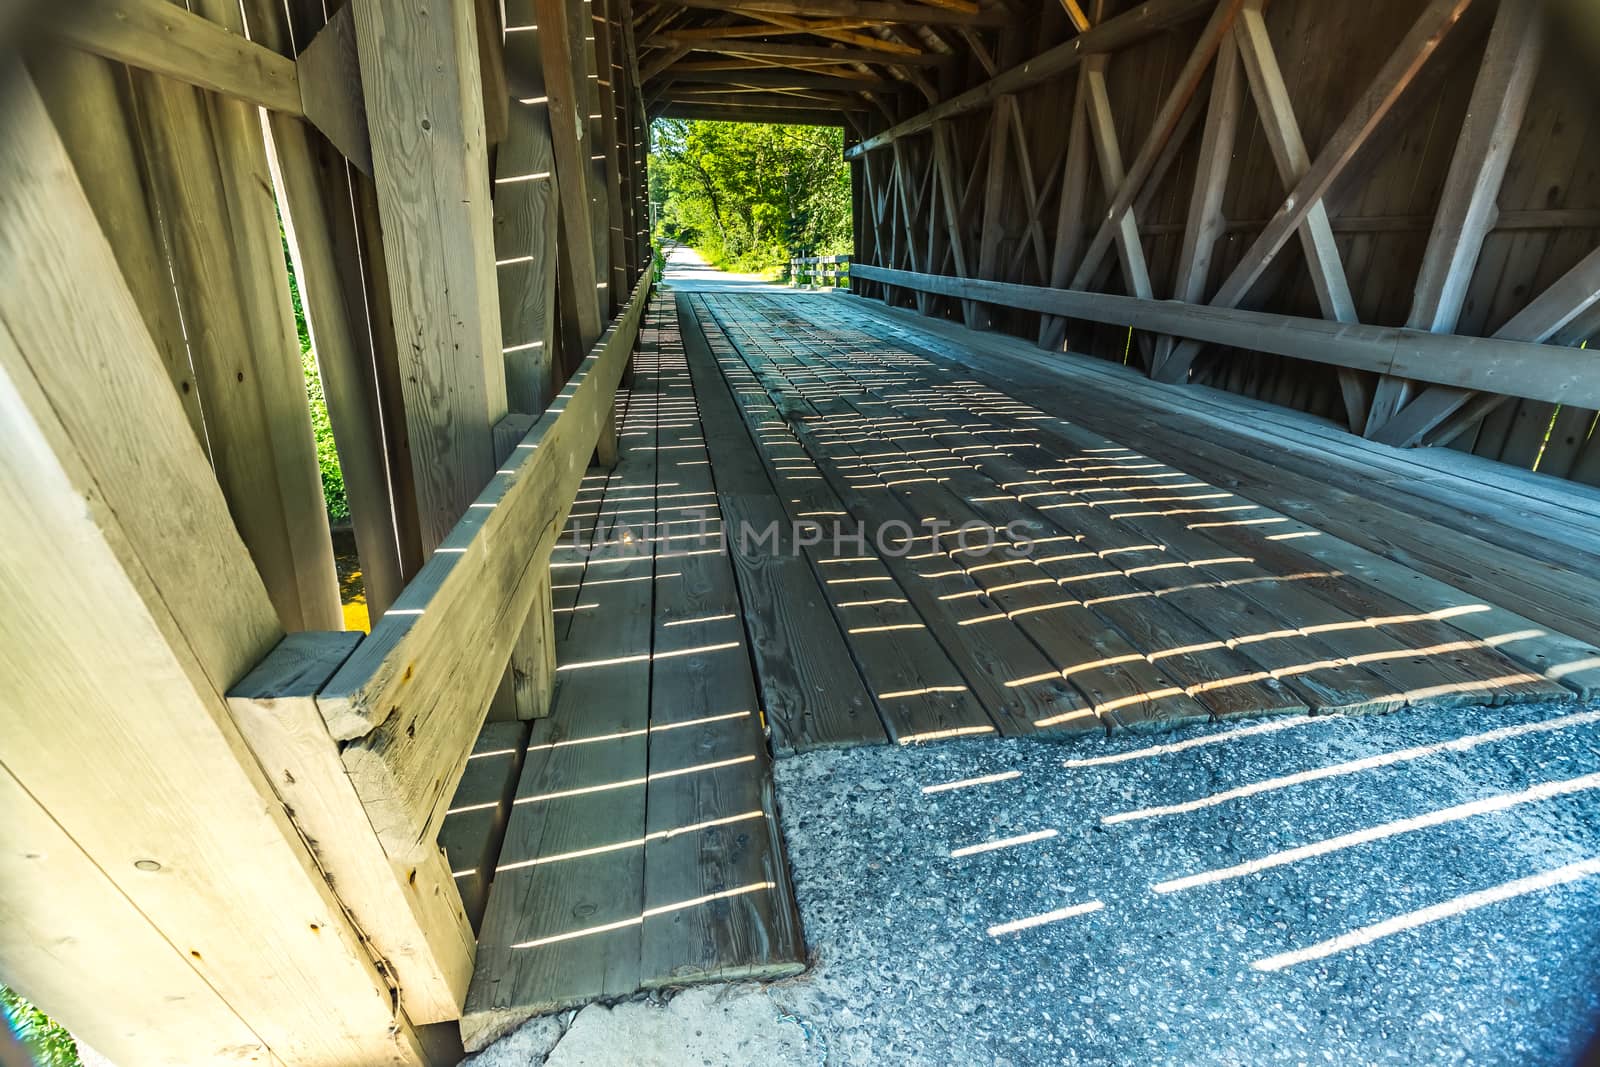 The Bement Covered Bridge, a long truss bridge, is a historic wooden covered bridge on Center Road over the Warner River in Bradford, New Hampshire.